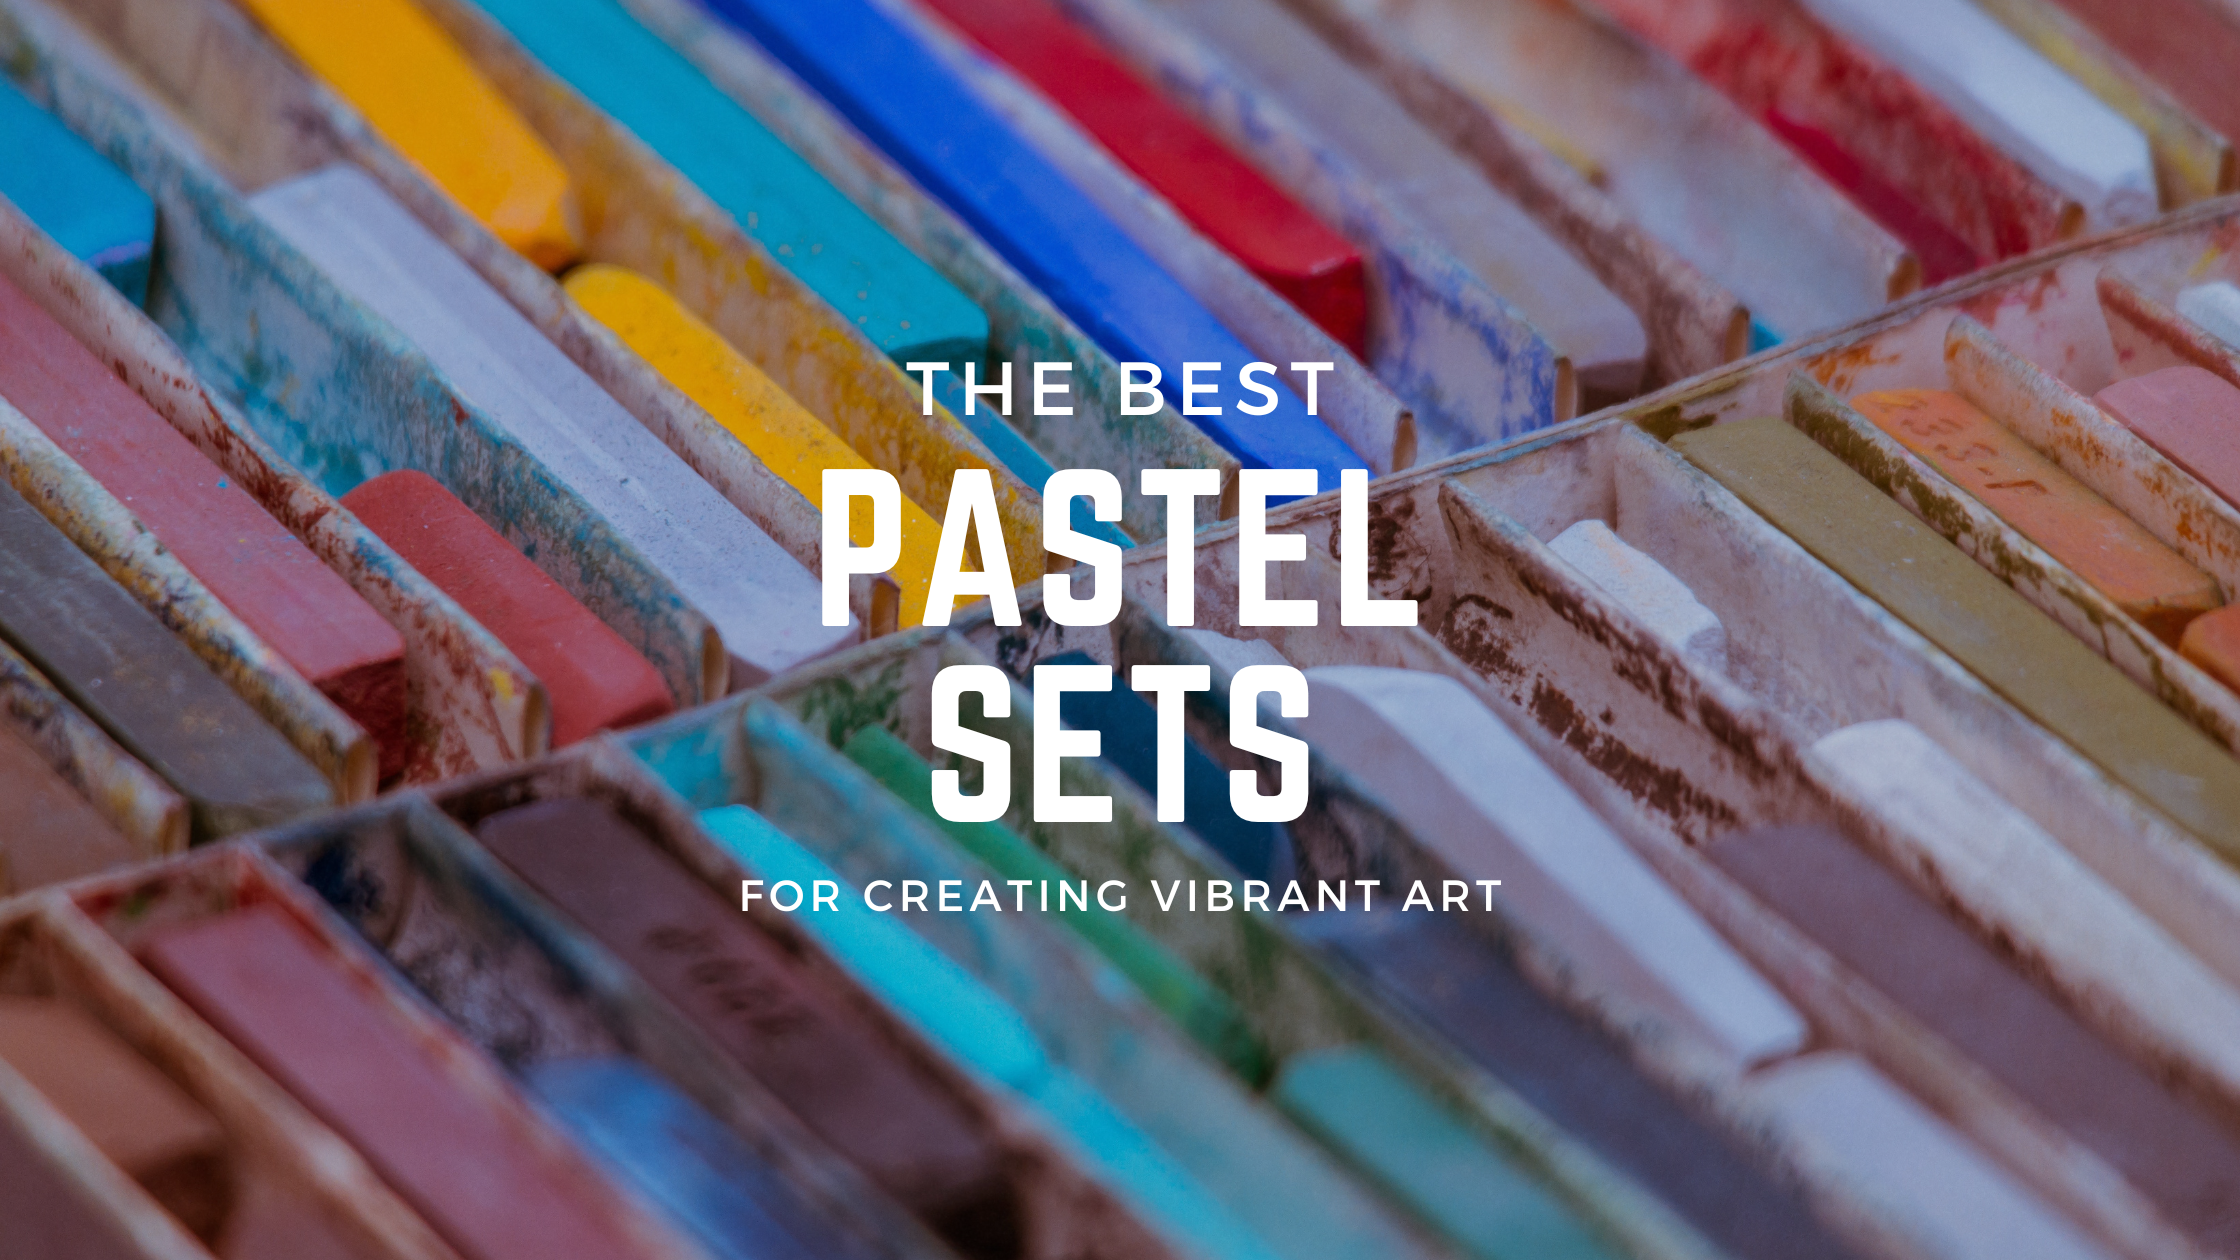 Tips for choosing a surface for pastels